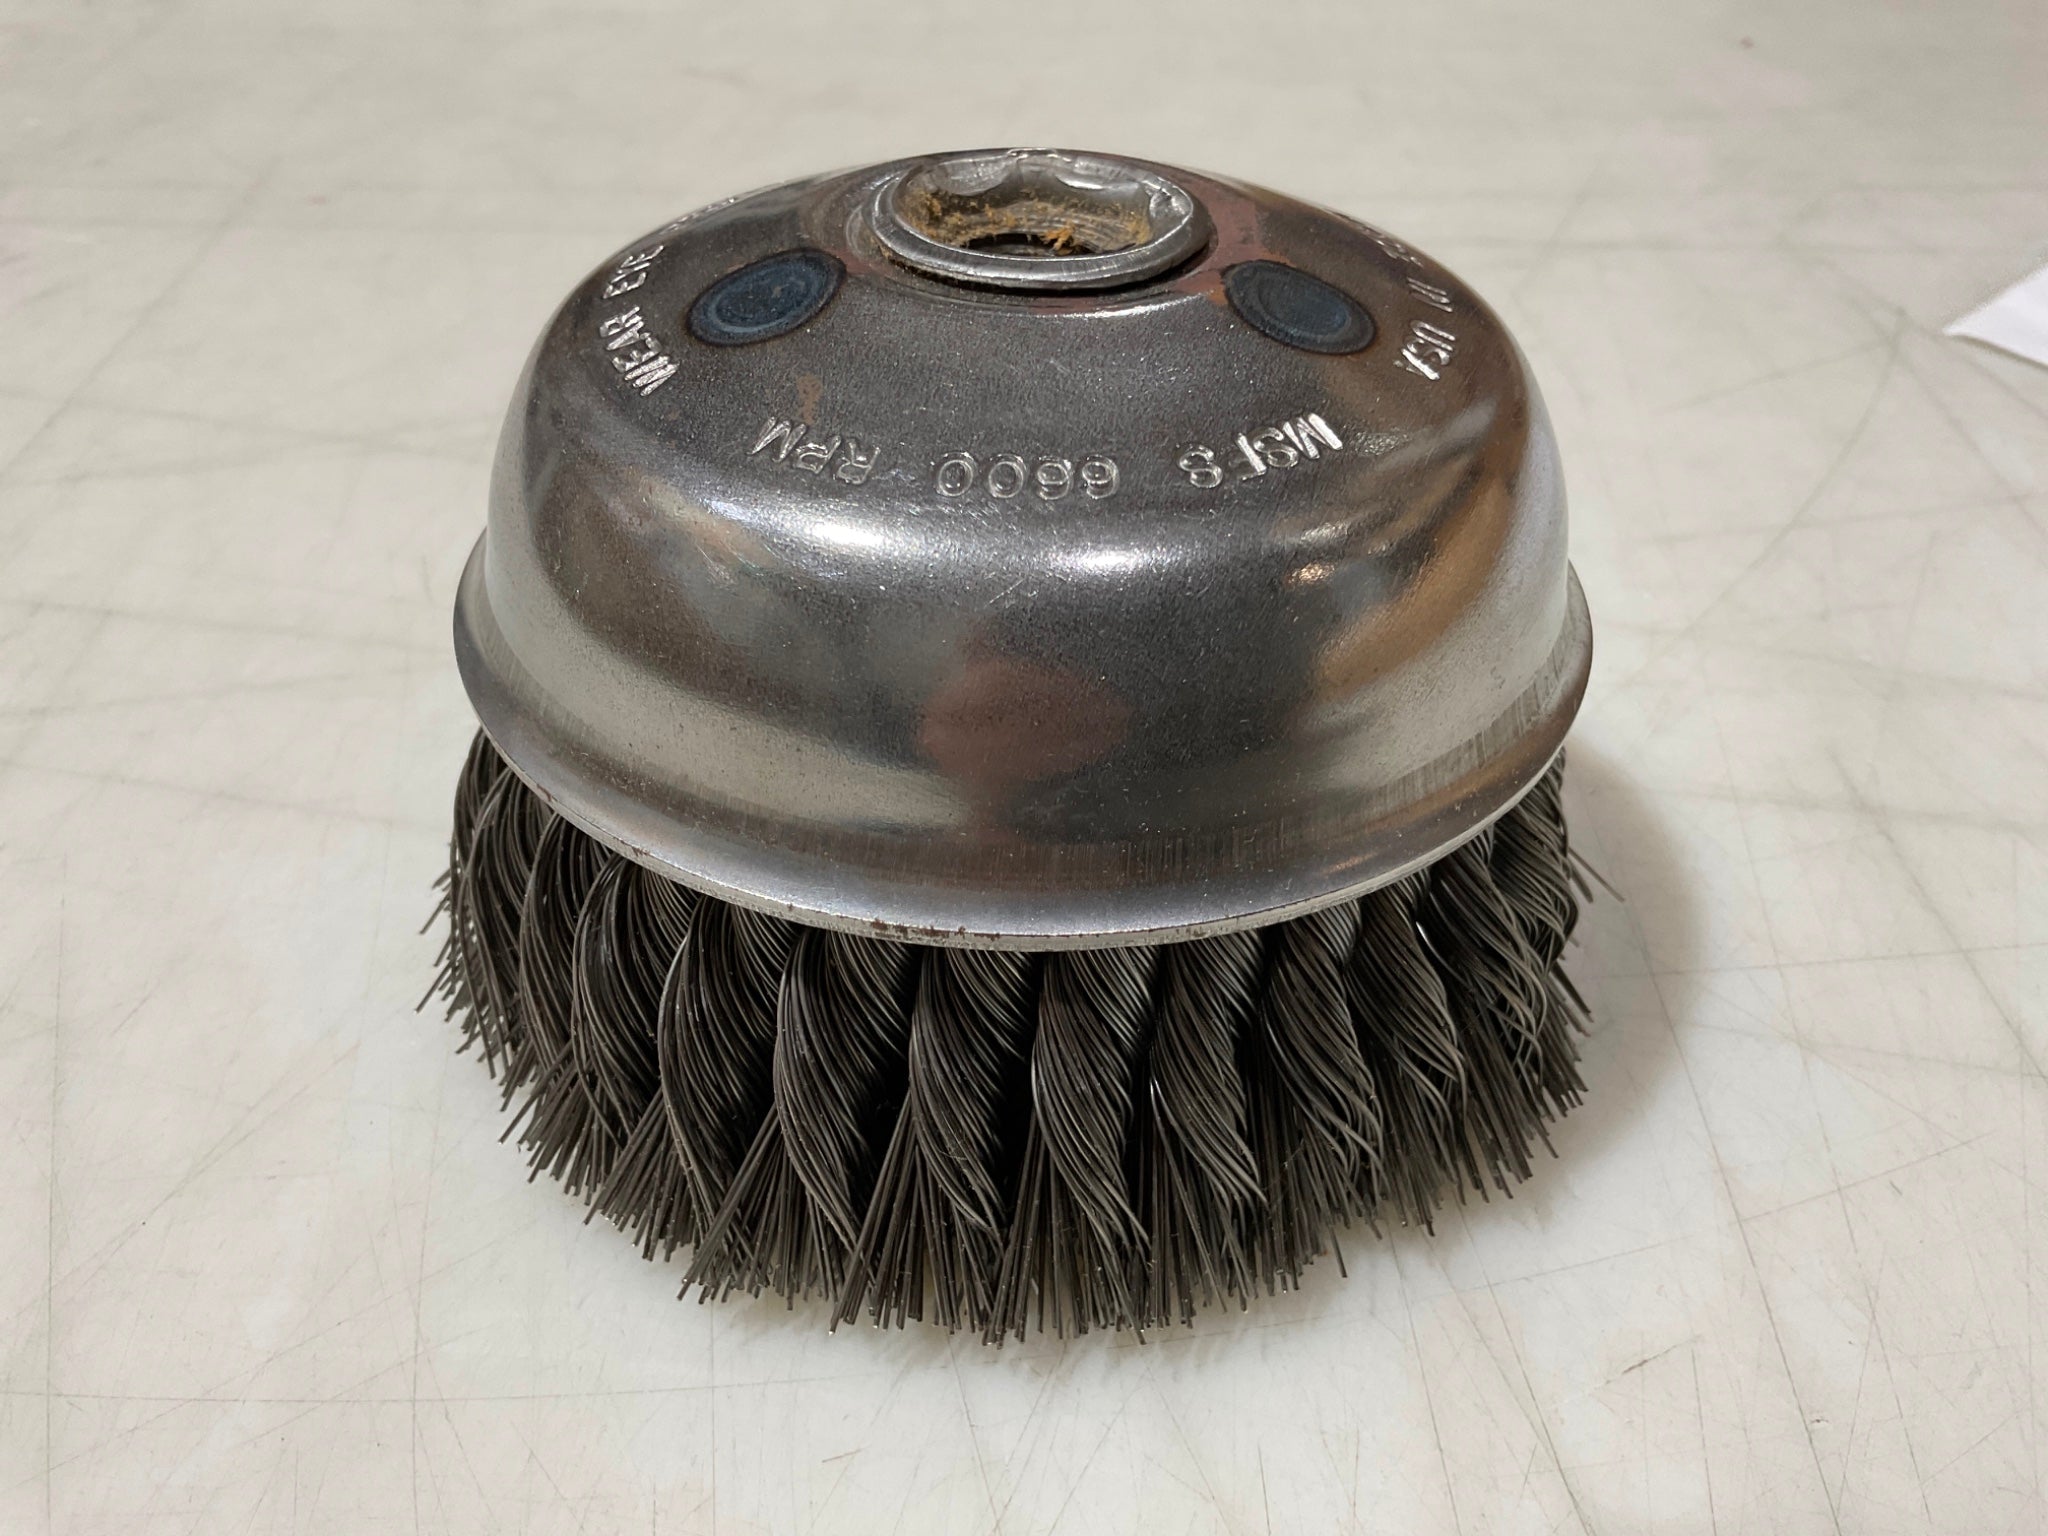 KD 1745 HD Knot Type Rotary Wire Cup Brush USA #61